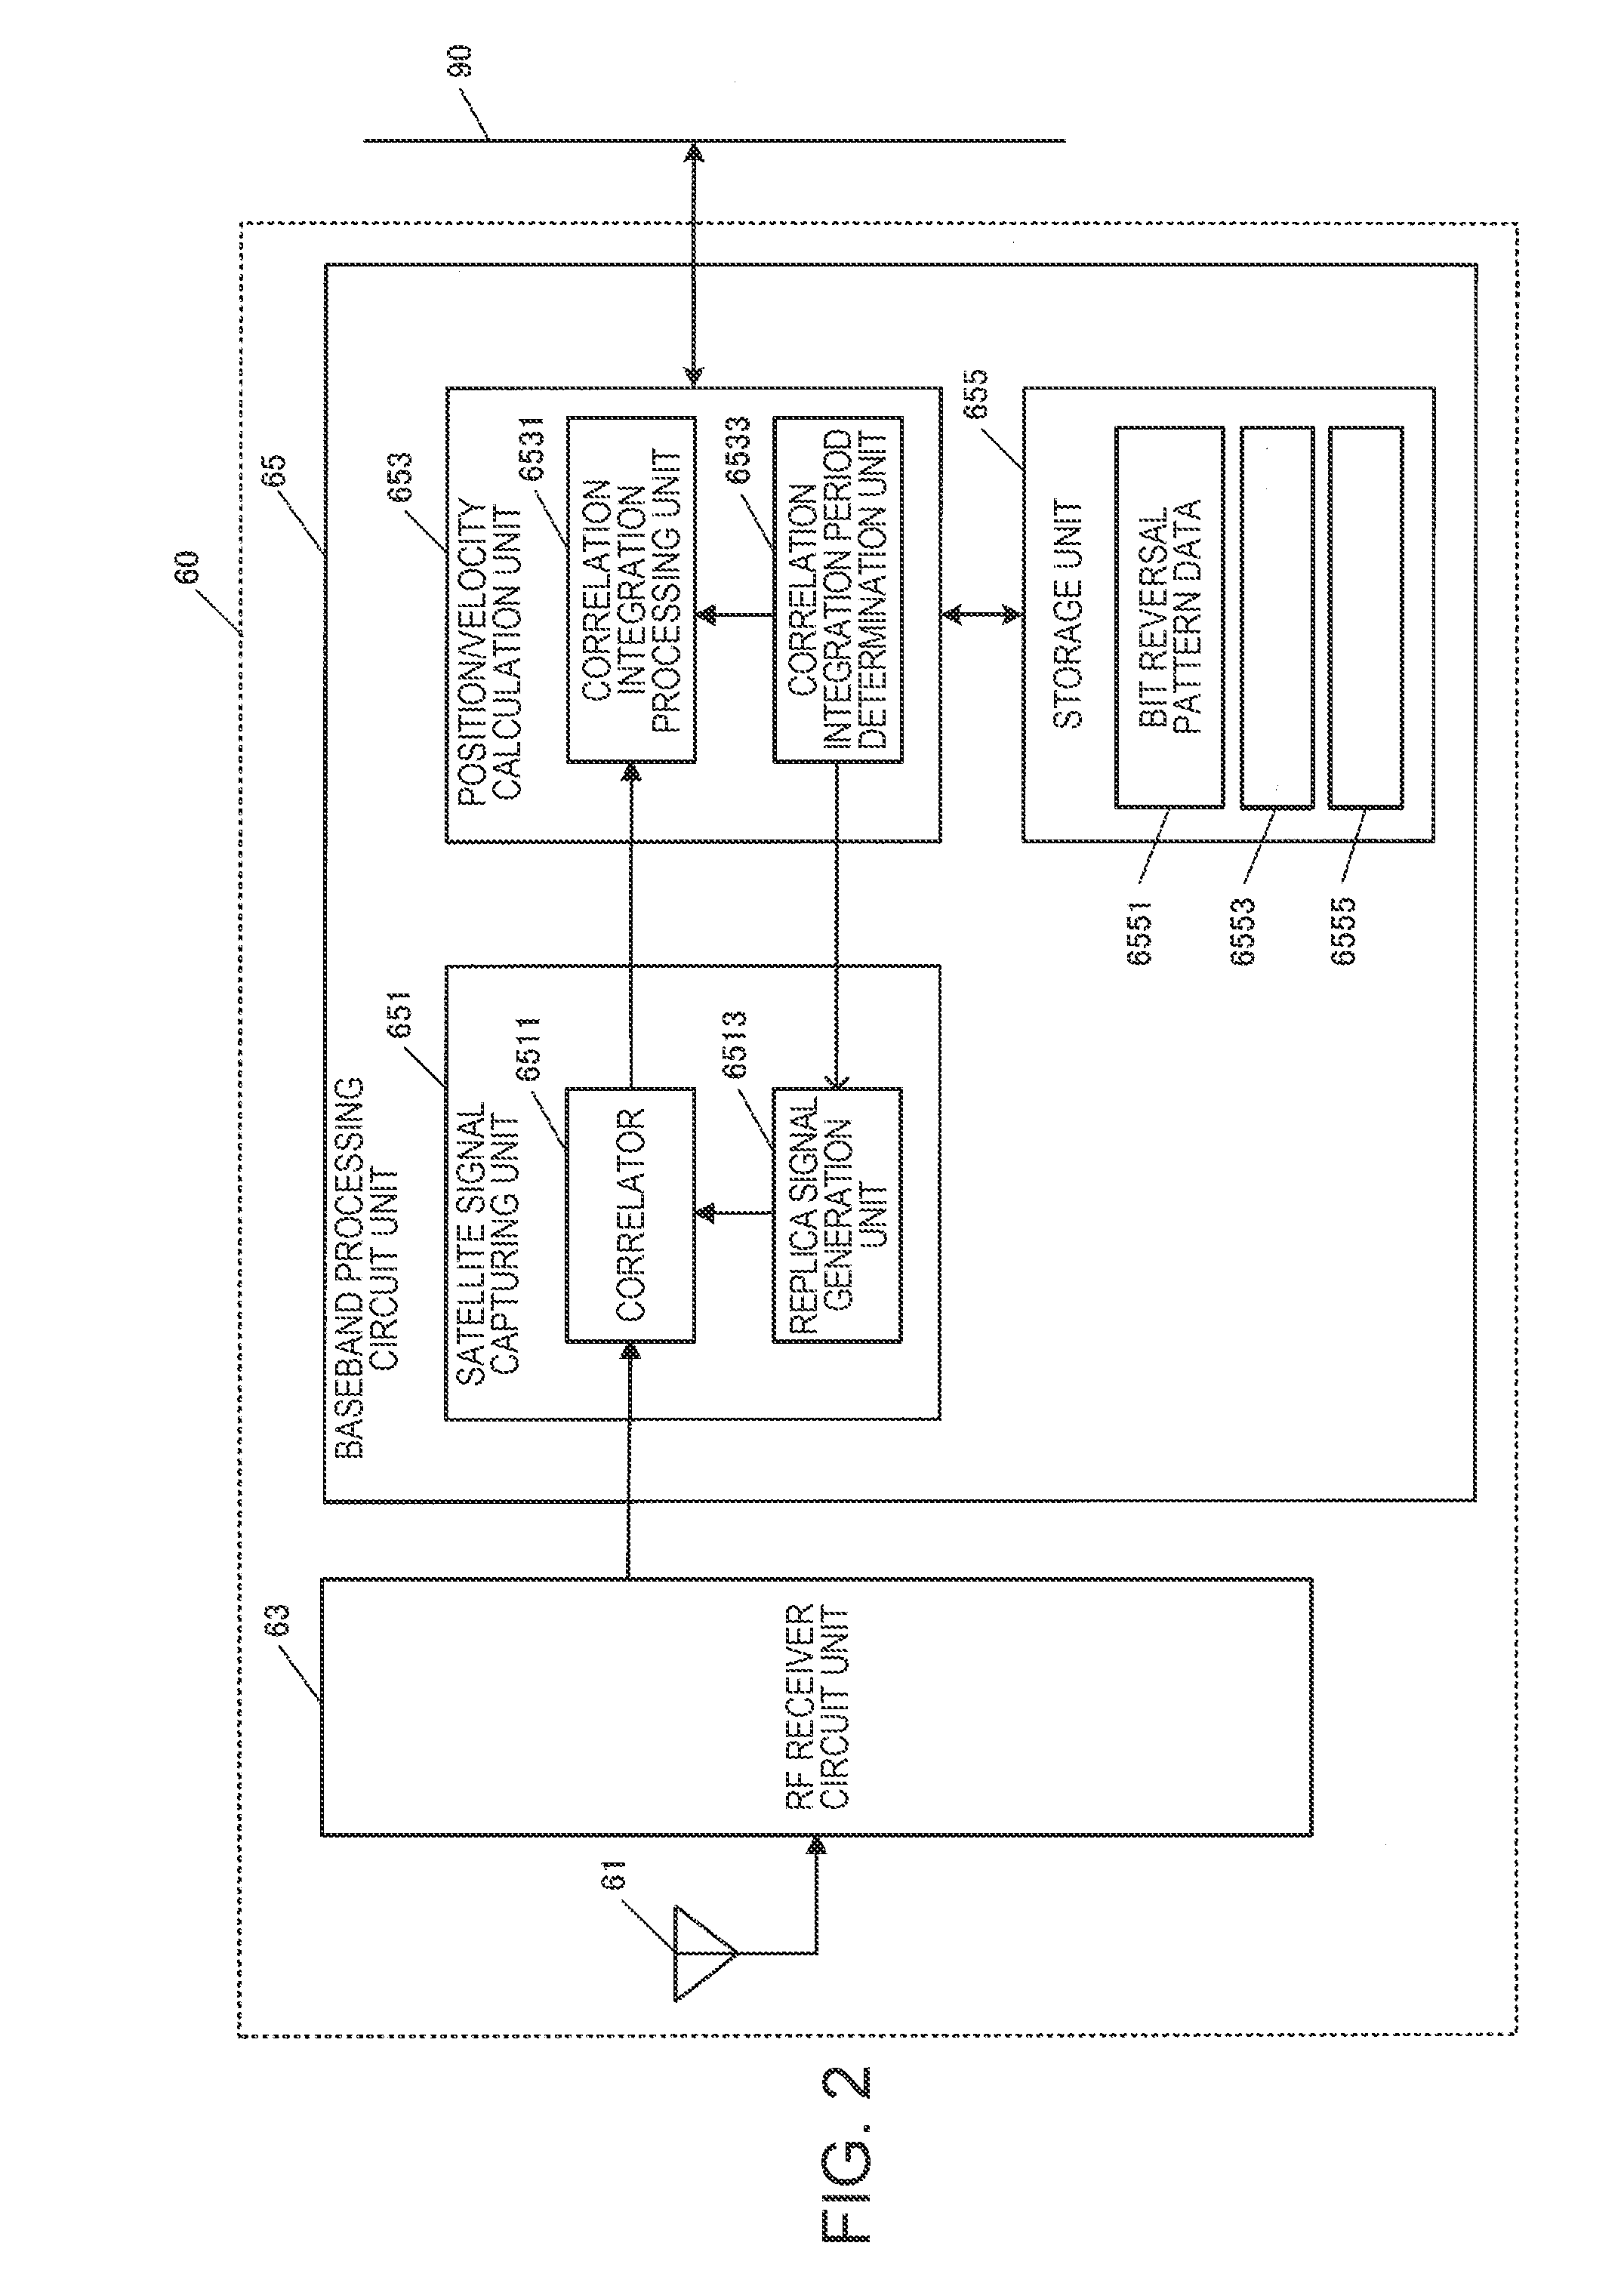 Method and system for calculating position